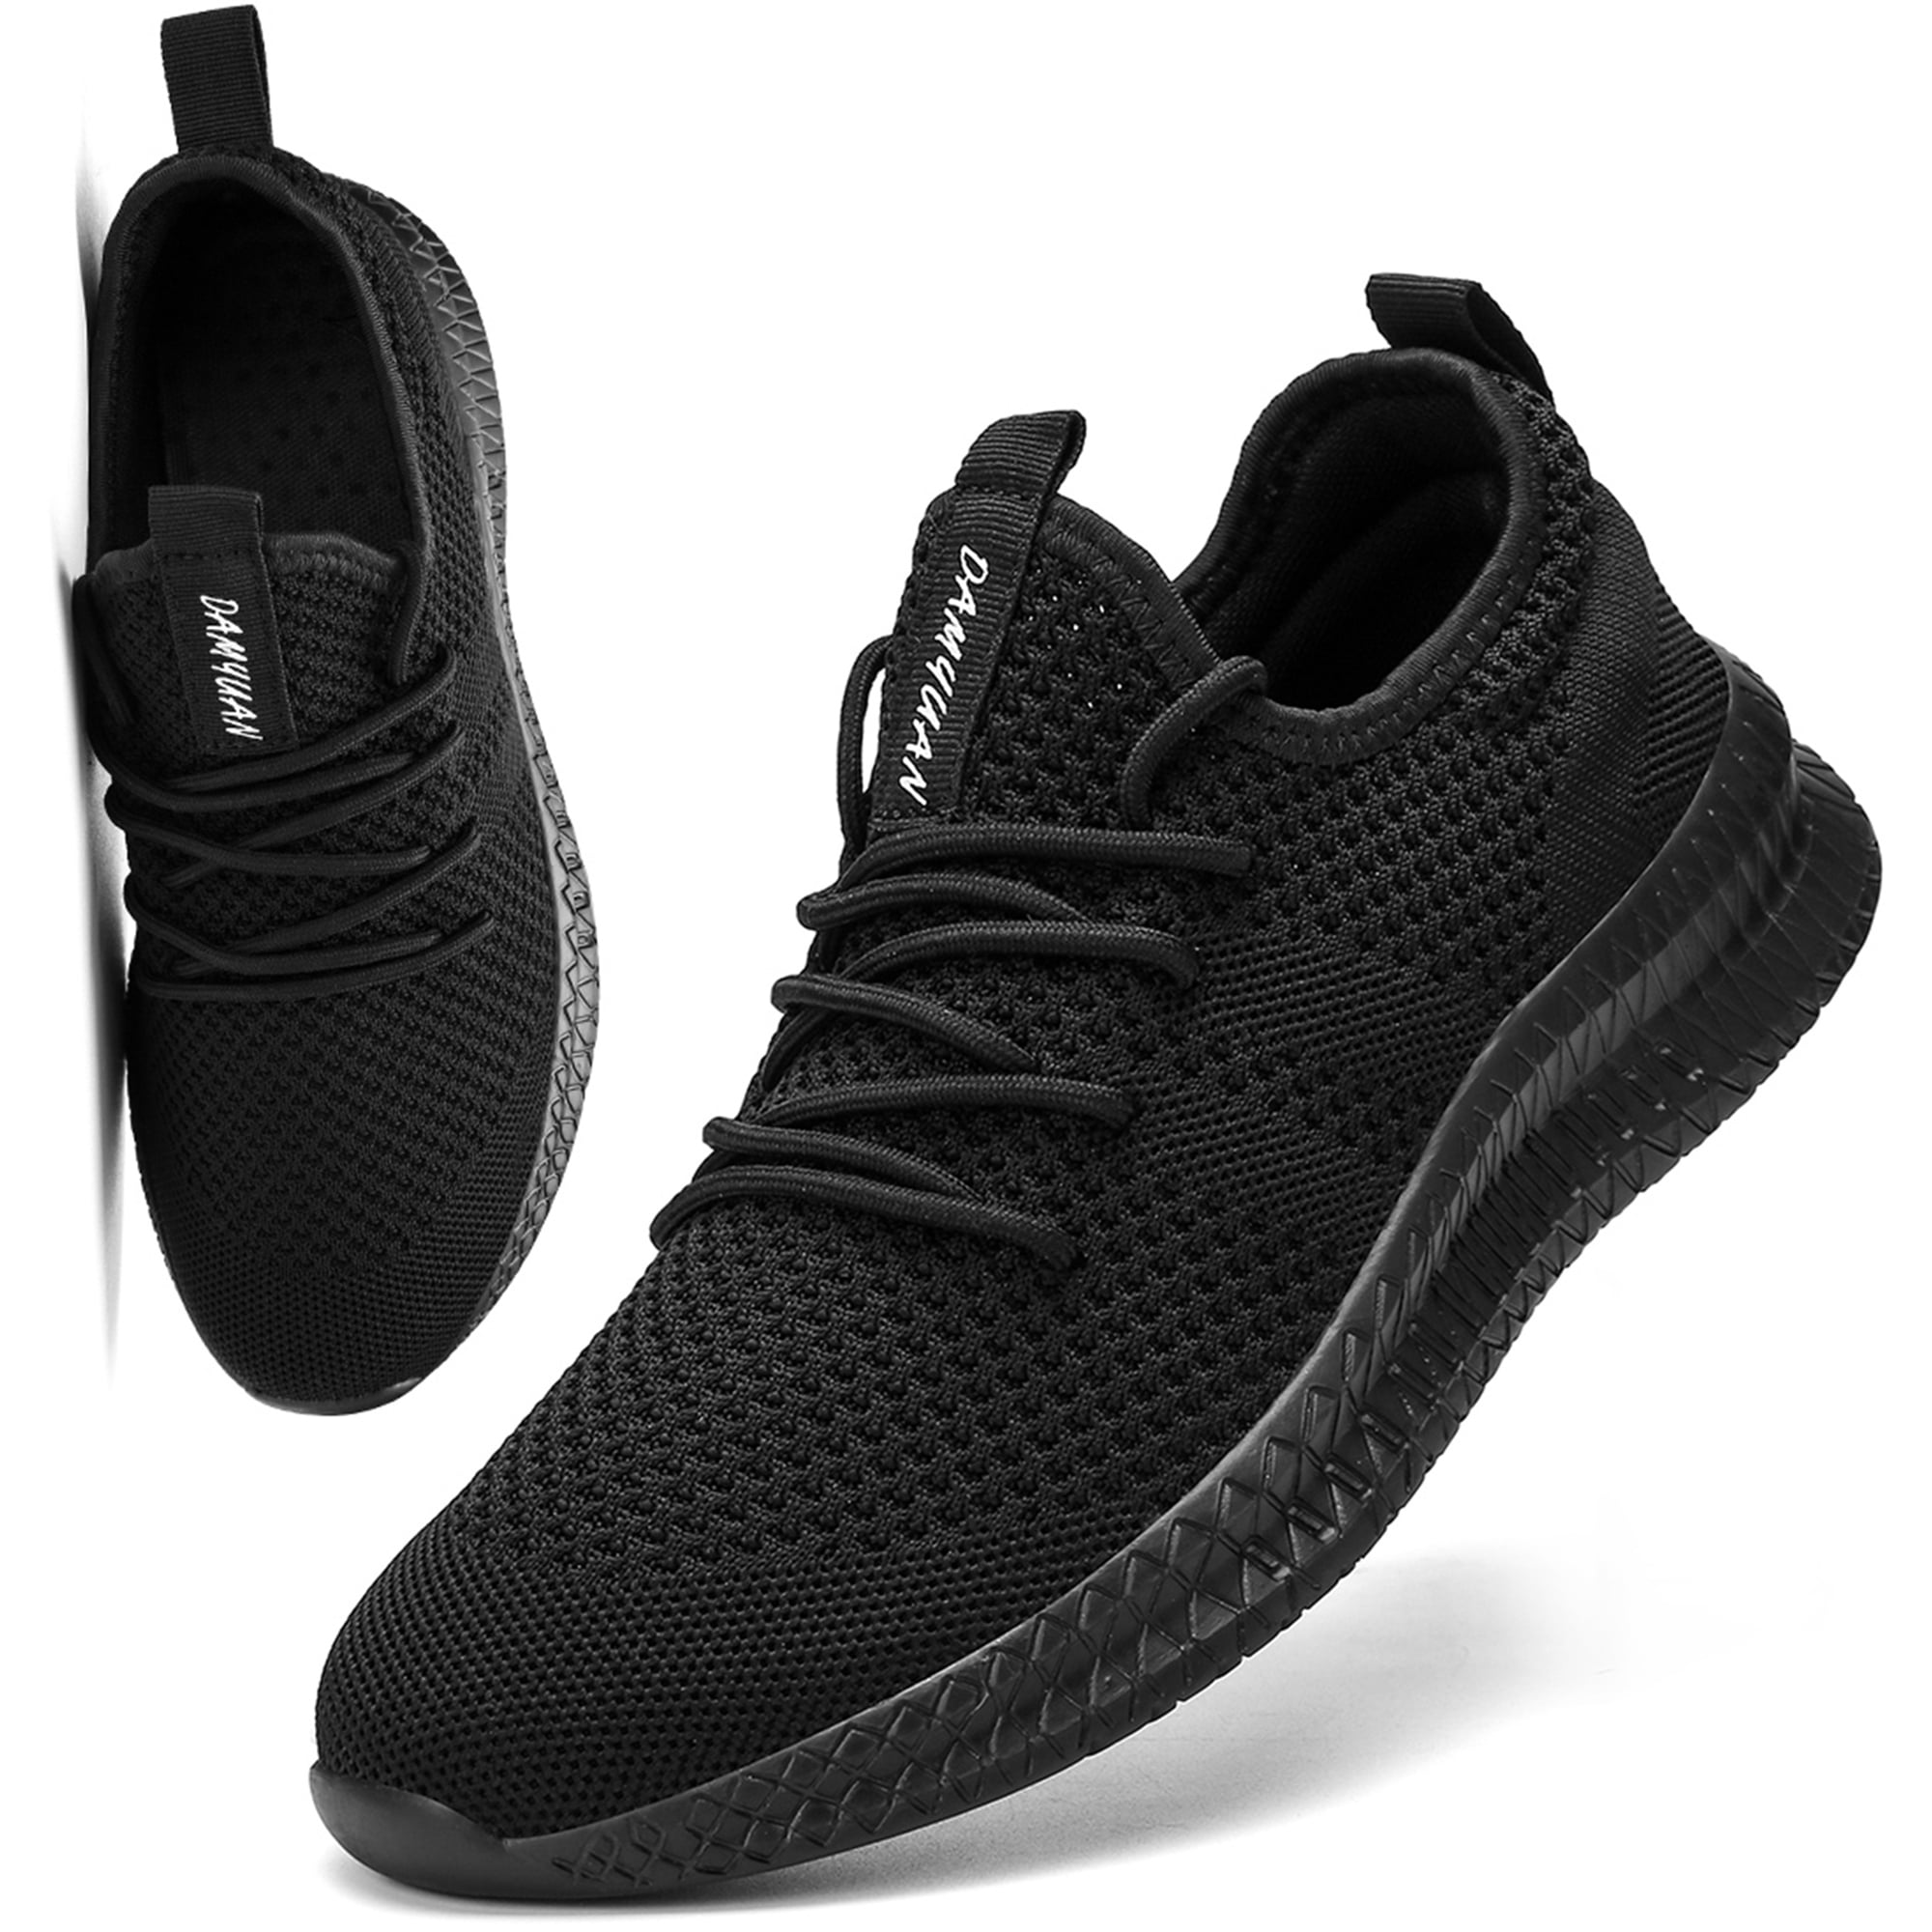 REUR RO RO Athletic Sneakers Mesh Casual Shoes Mens Lightweight Trainer ...